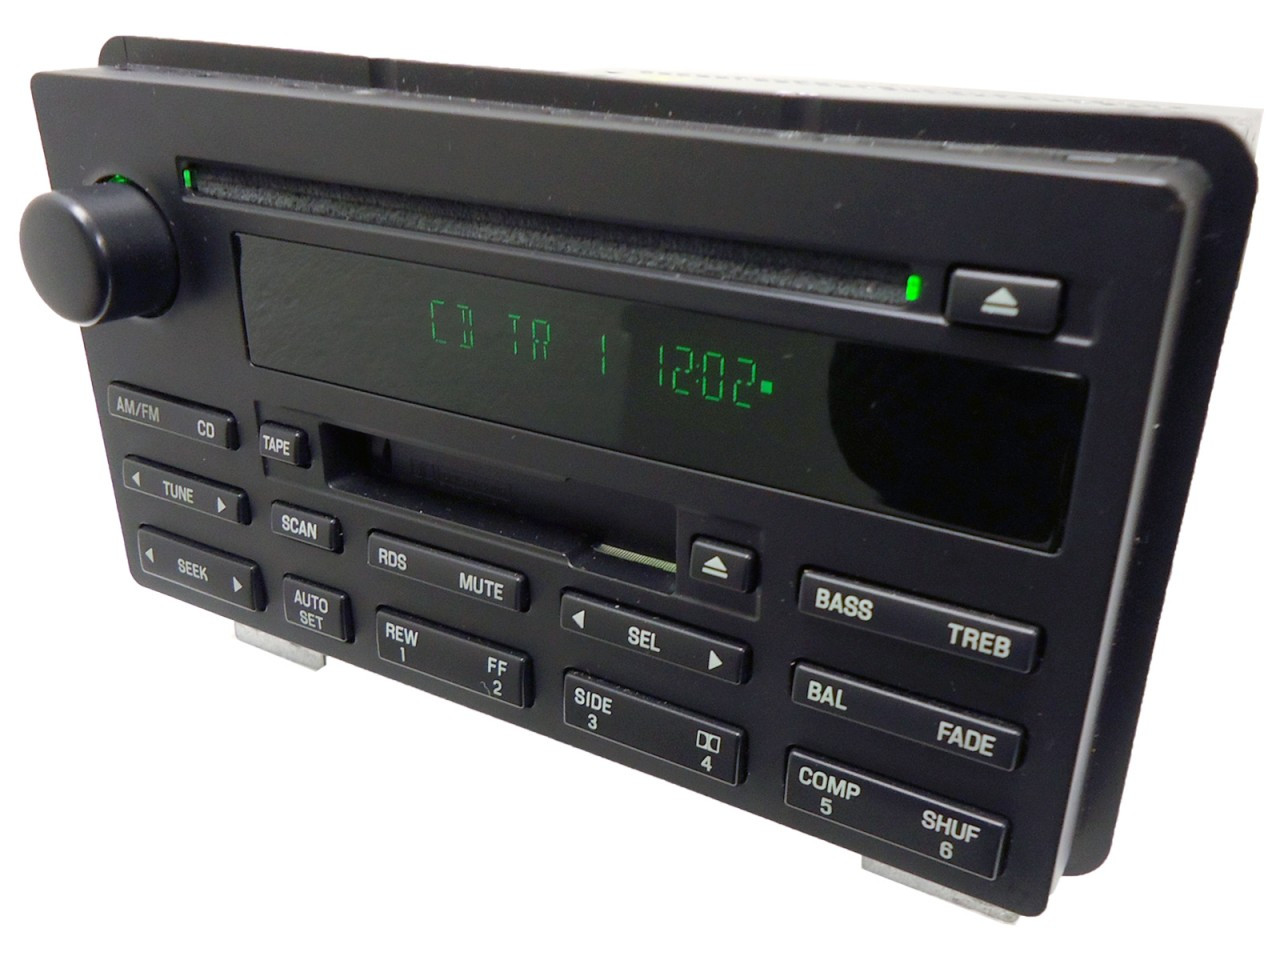 03 04 05 06 07 Ford Expedition Radio Tape CD Disc Player RDS Stereo